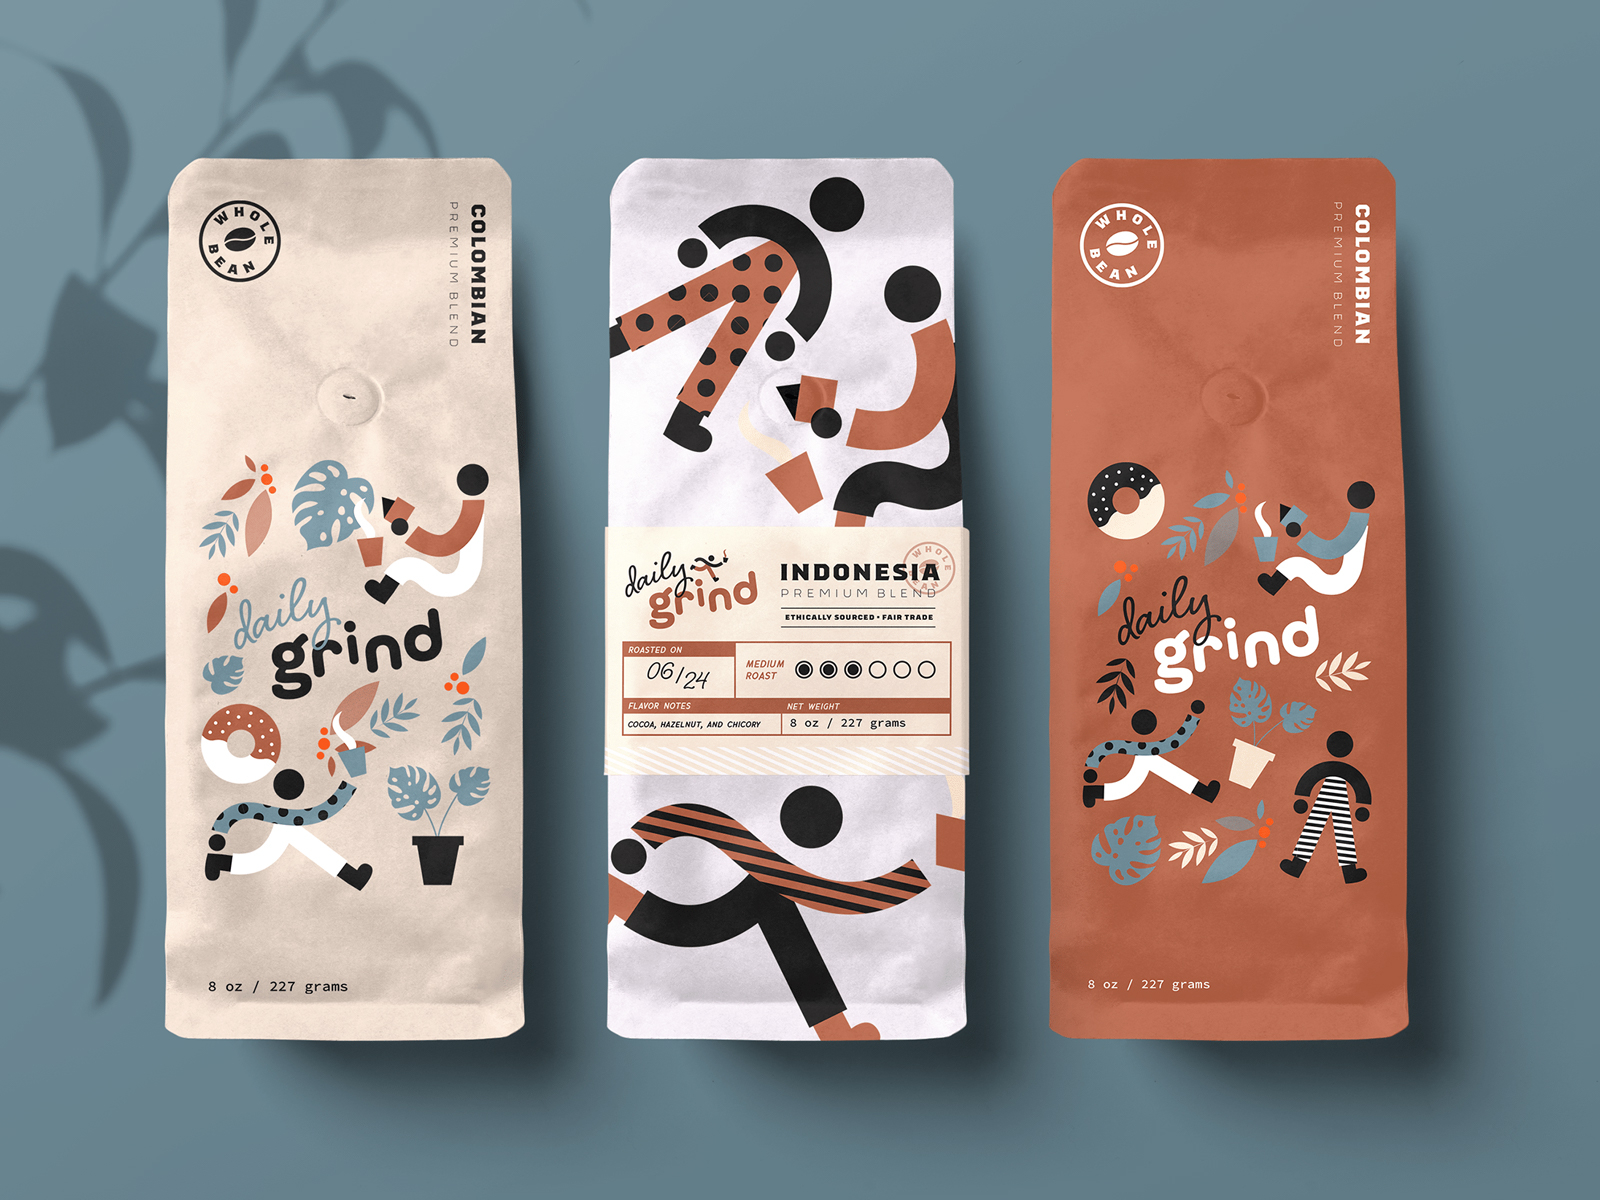 Download Free Coffee Bags Mockups by Mr.Mockup™ on Dribbble